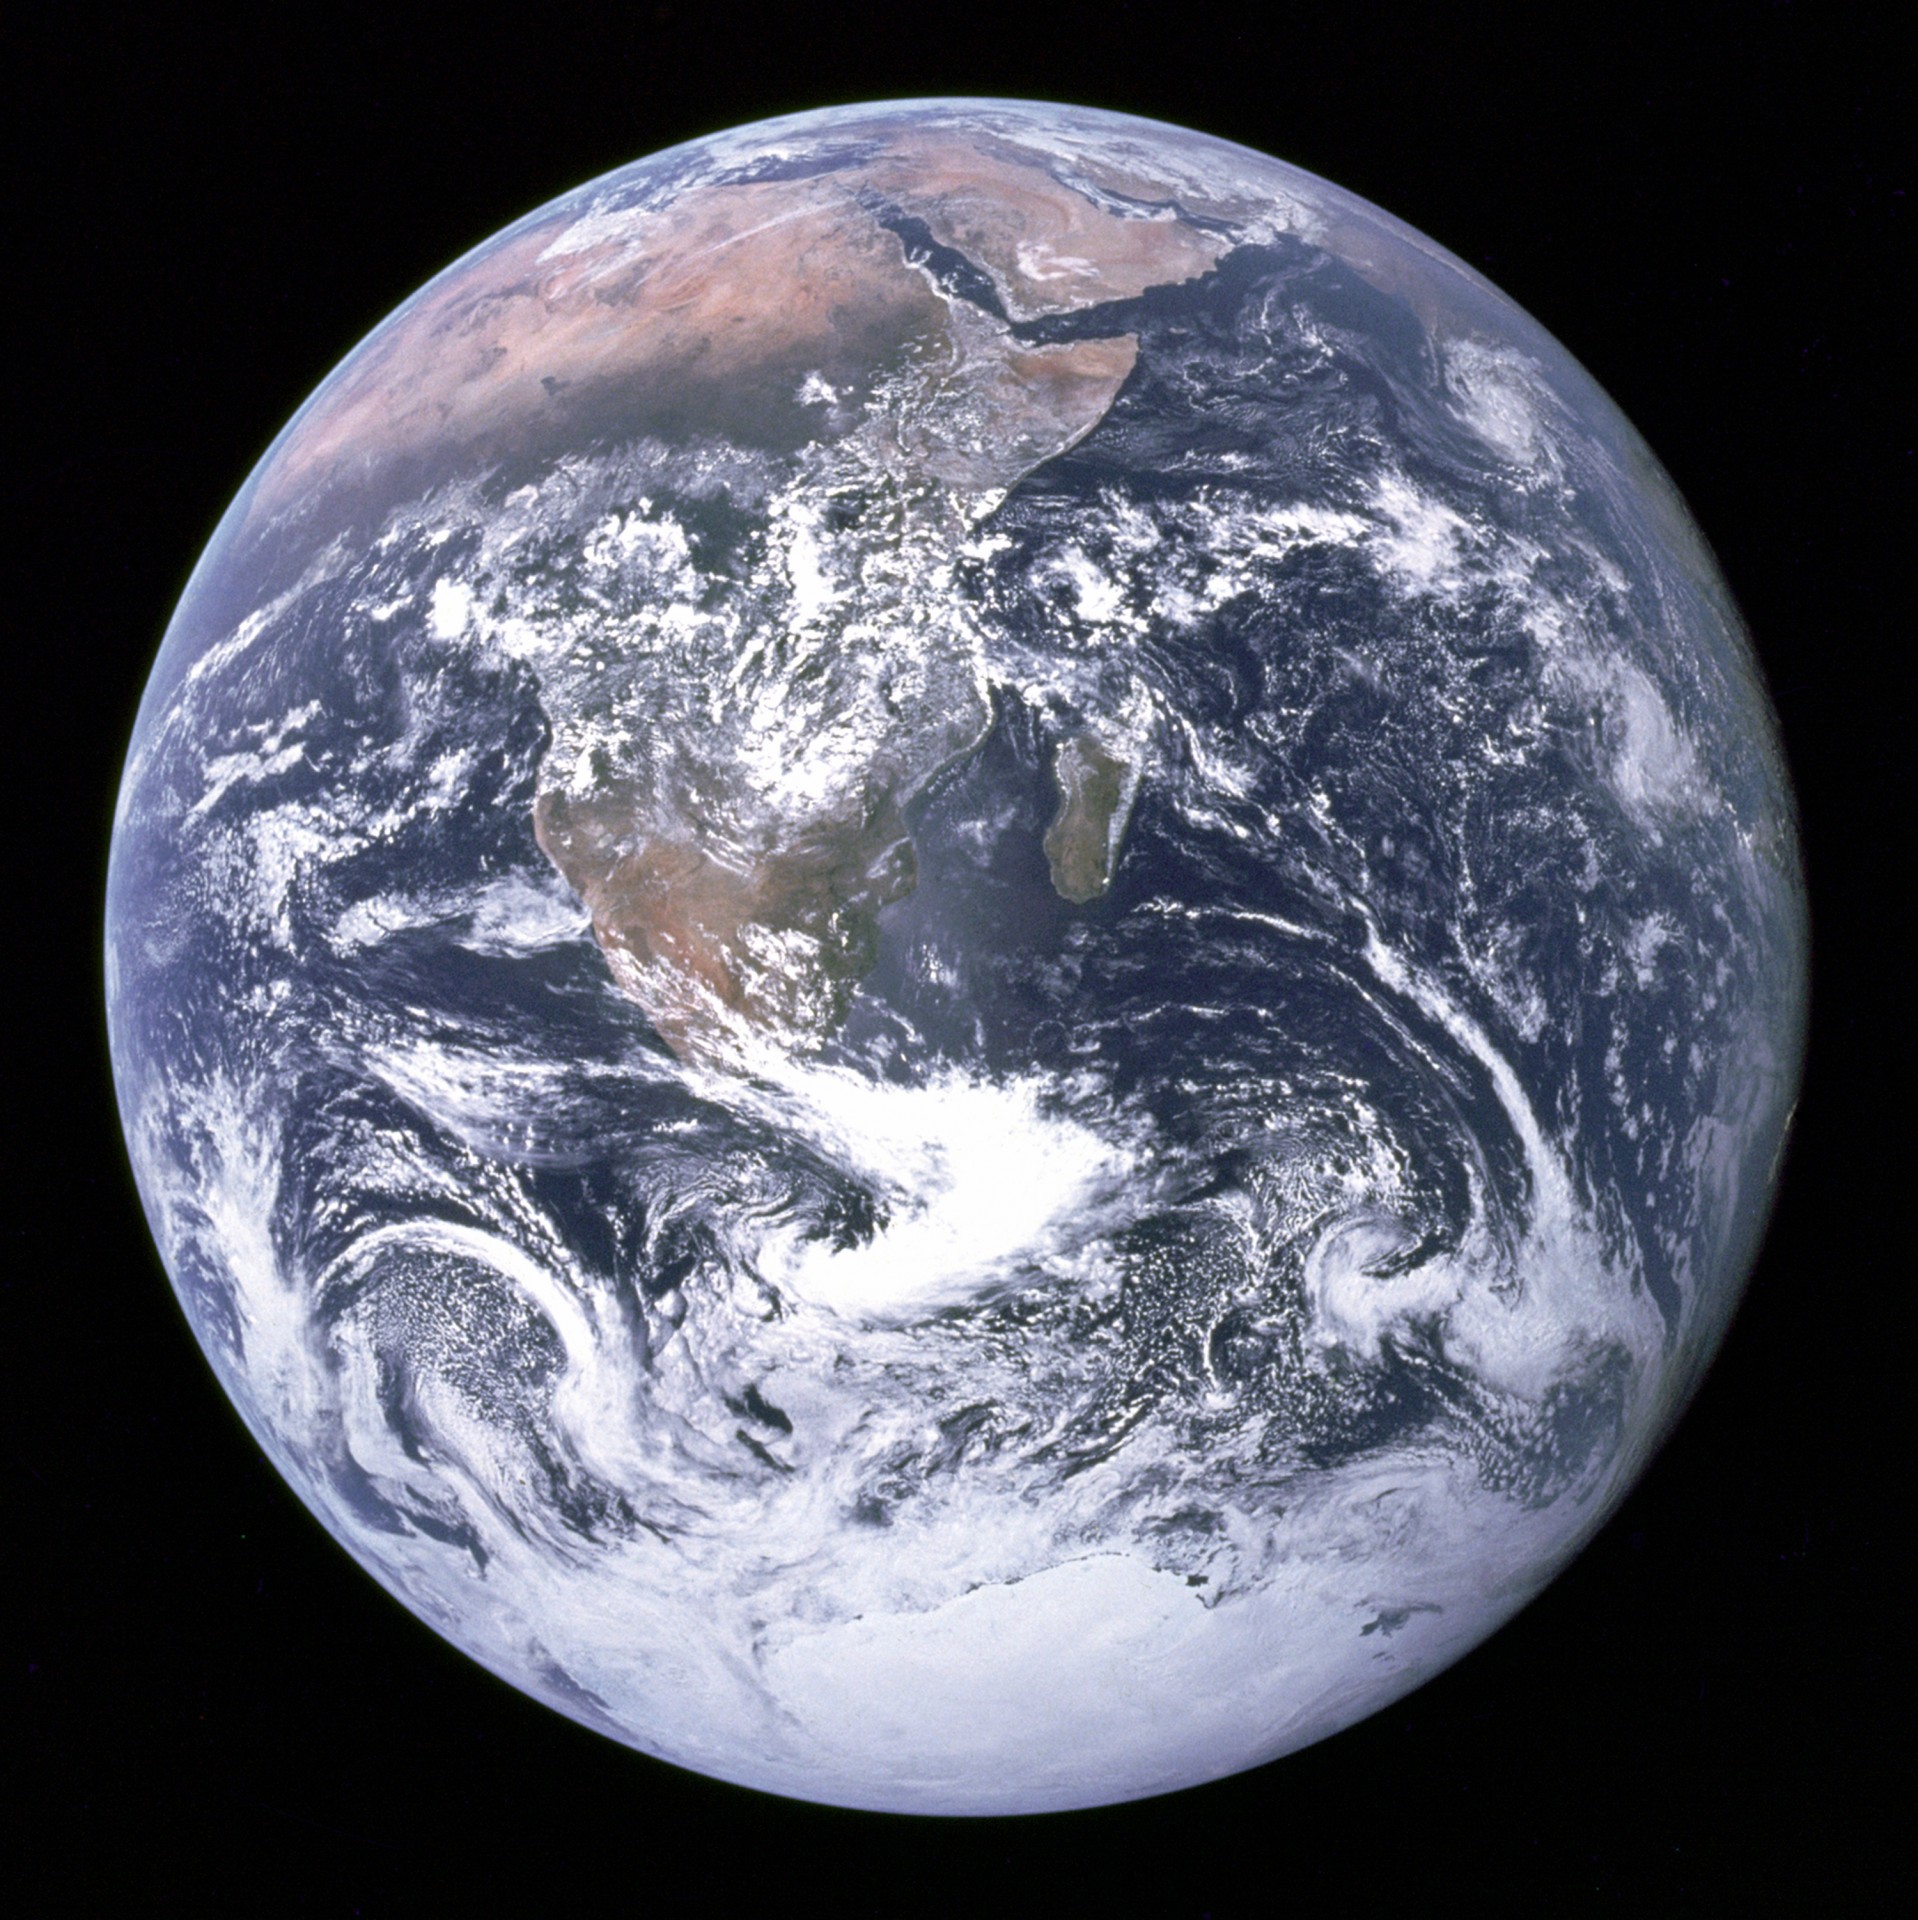 This is a public domain image created by NASA.